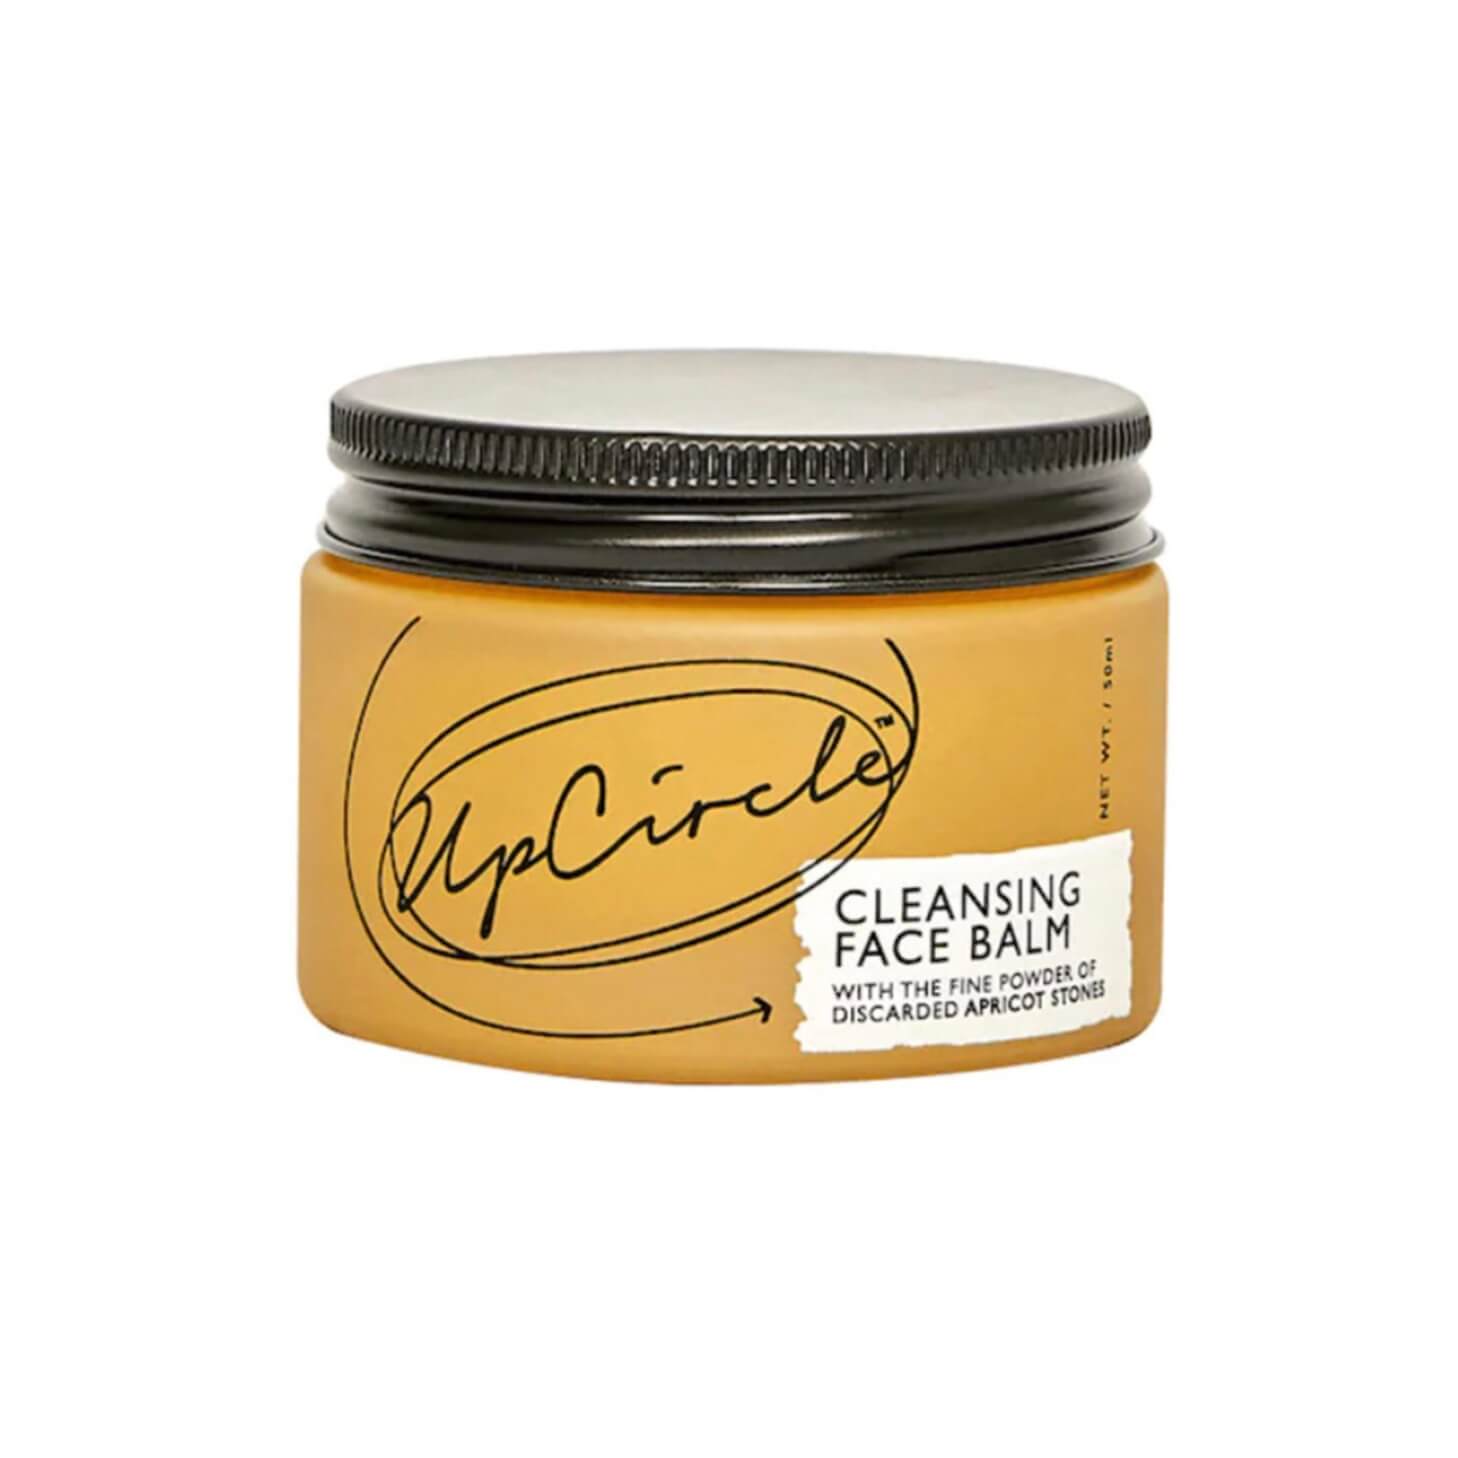 Cleansing Face Balm - Plastic Free Amsterdam